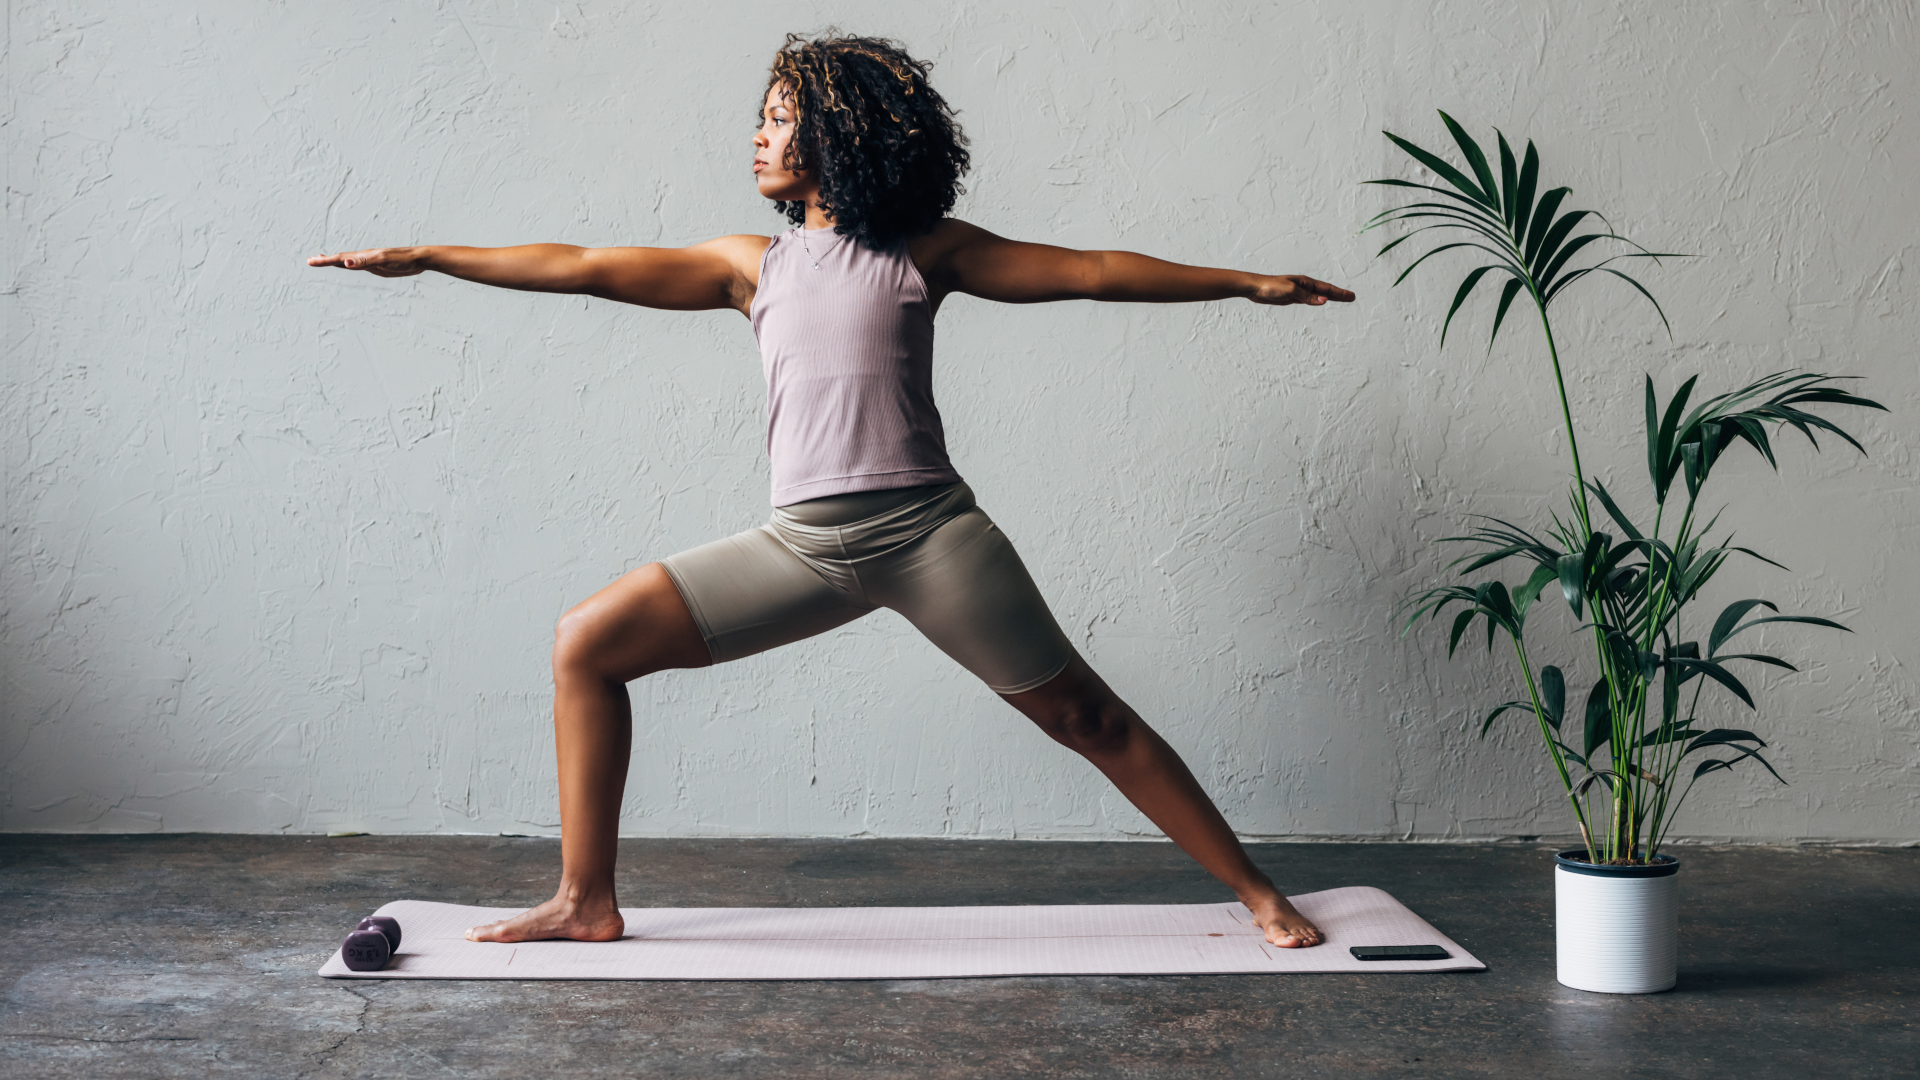 30 Yoga Poses for Hip Opening - The Secret to Flexible Hips — Yoga Room  Hawaii